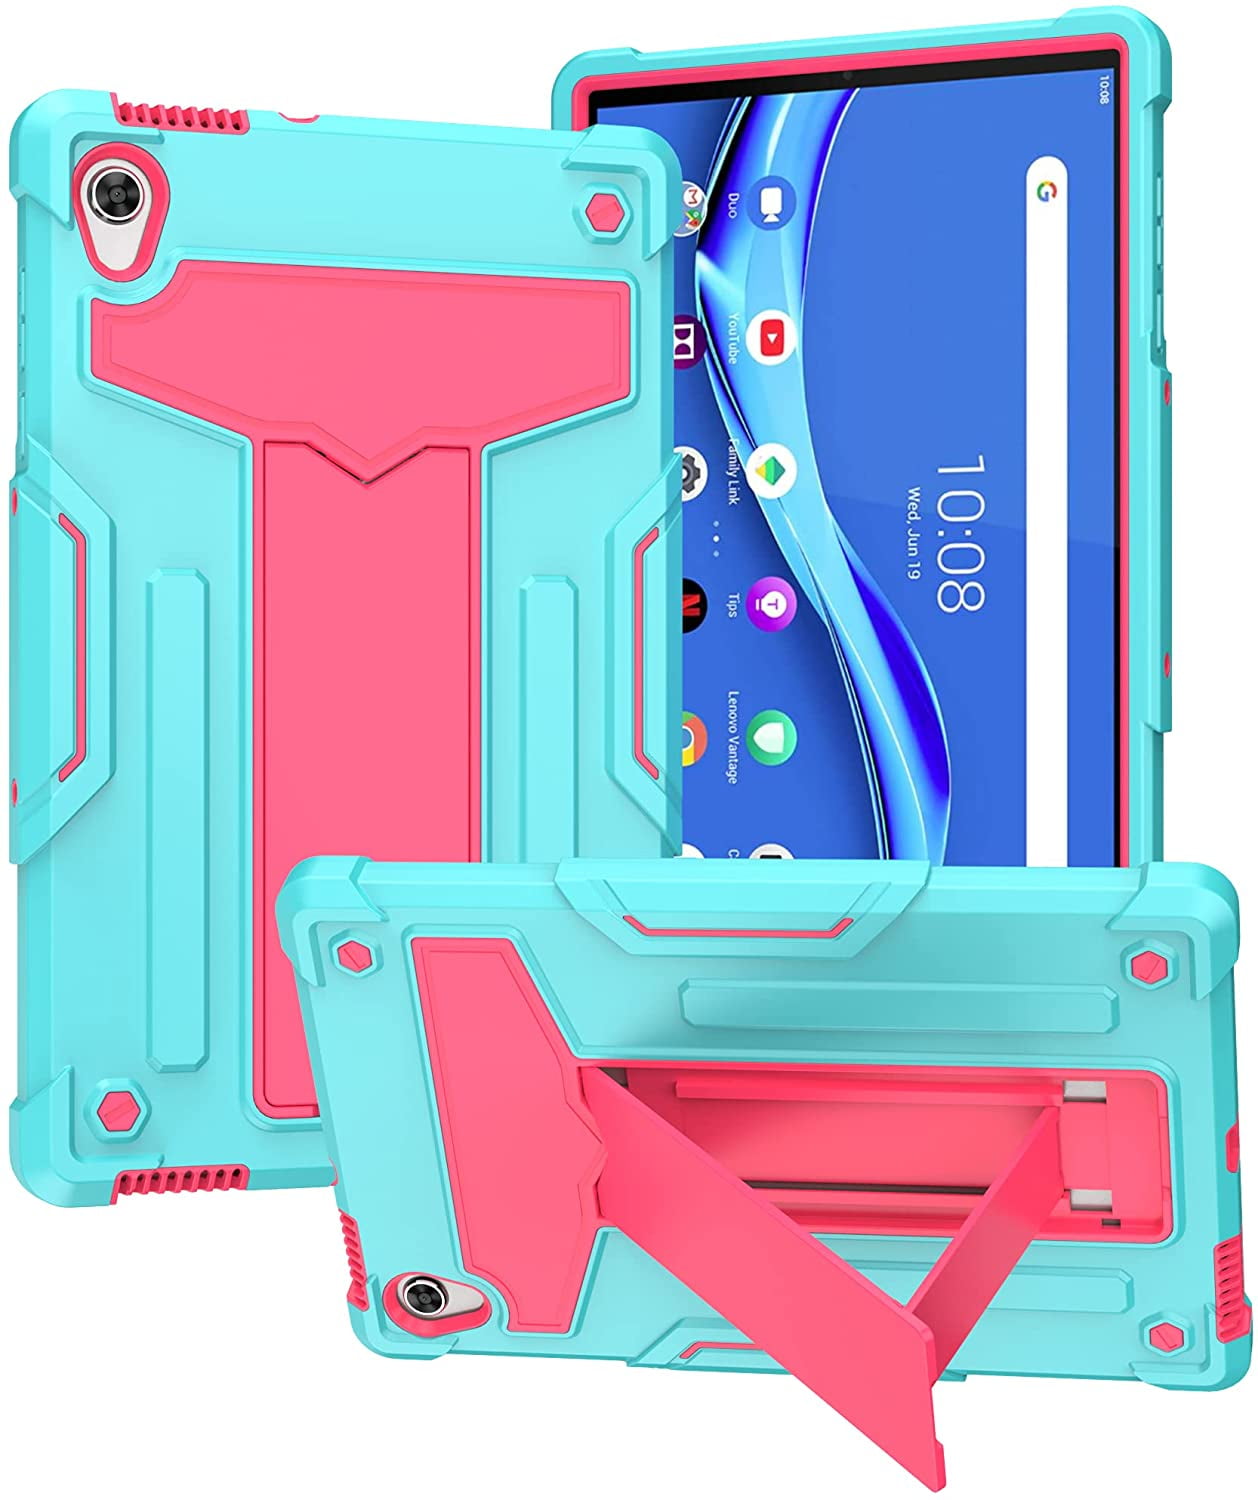 Epicgadget Case for Lenovo Tab M10 HD (2nd Gen)/Smart Tab M10 HD (2nd Gen)  TB-X306F/TB-X306X - Hybrid Case Cover with Kickstand for Lenovo Tab M10 HD